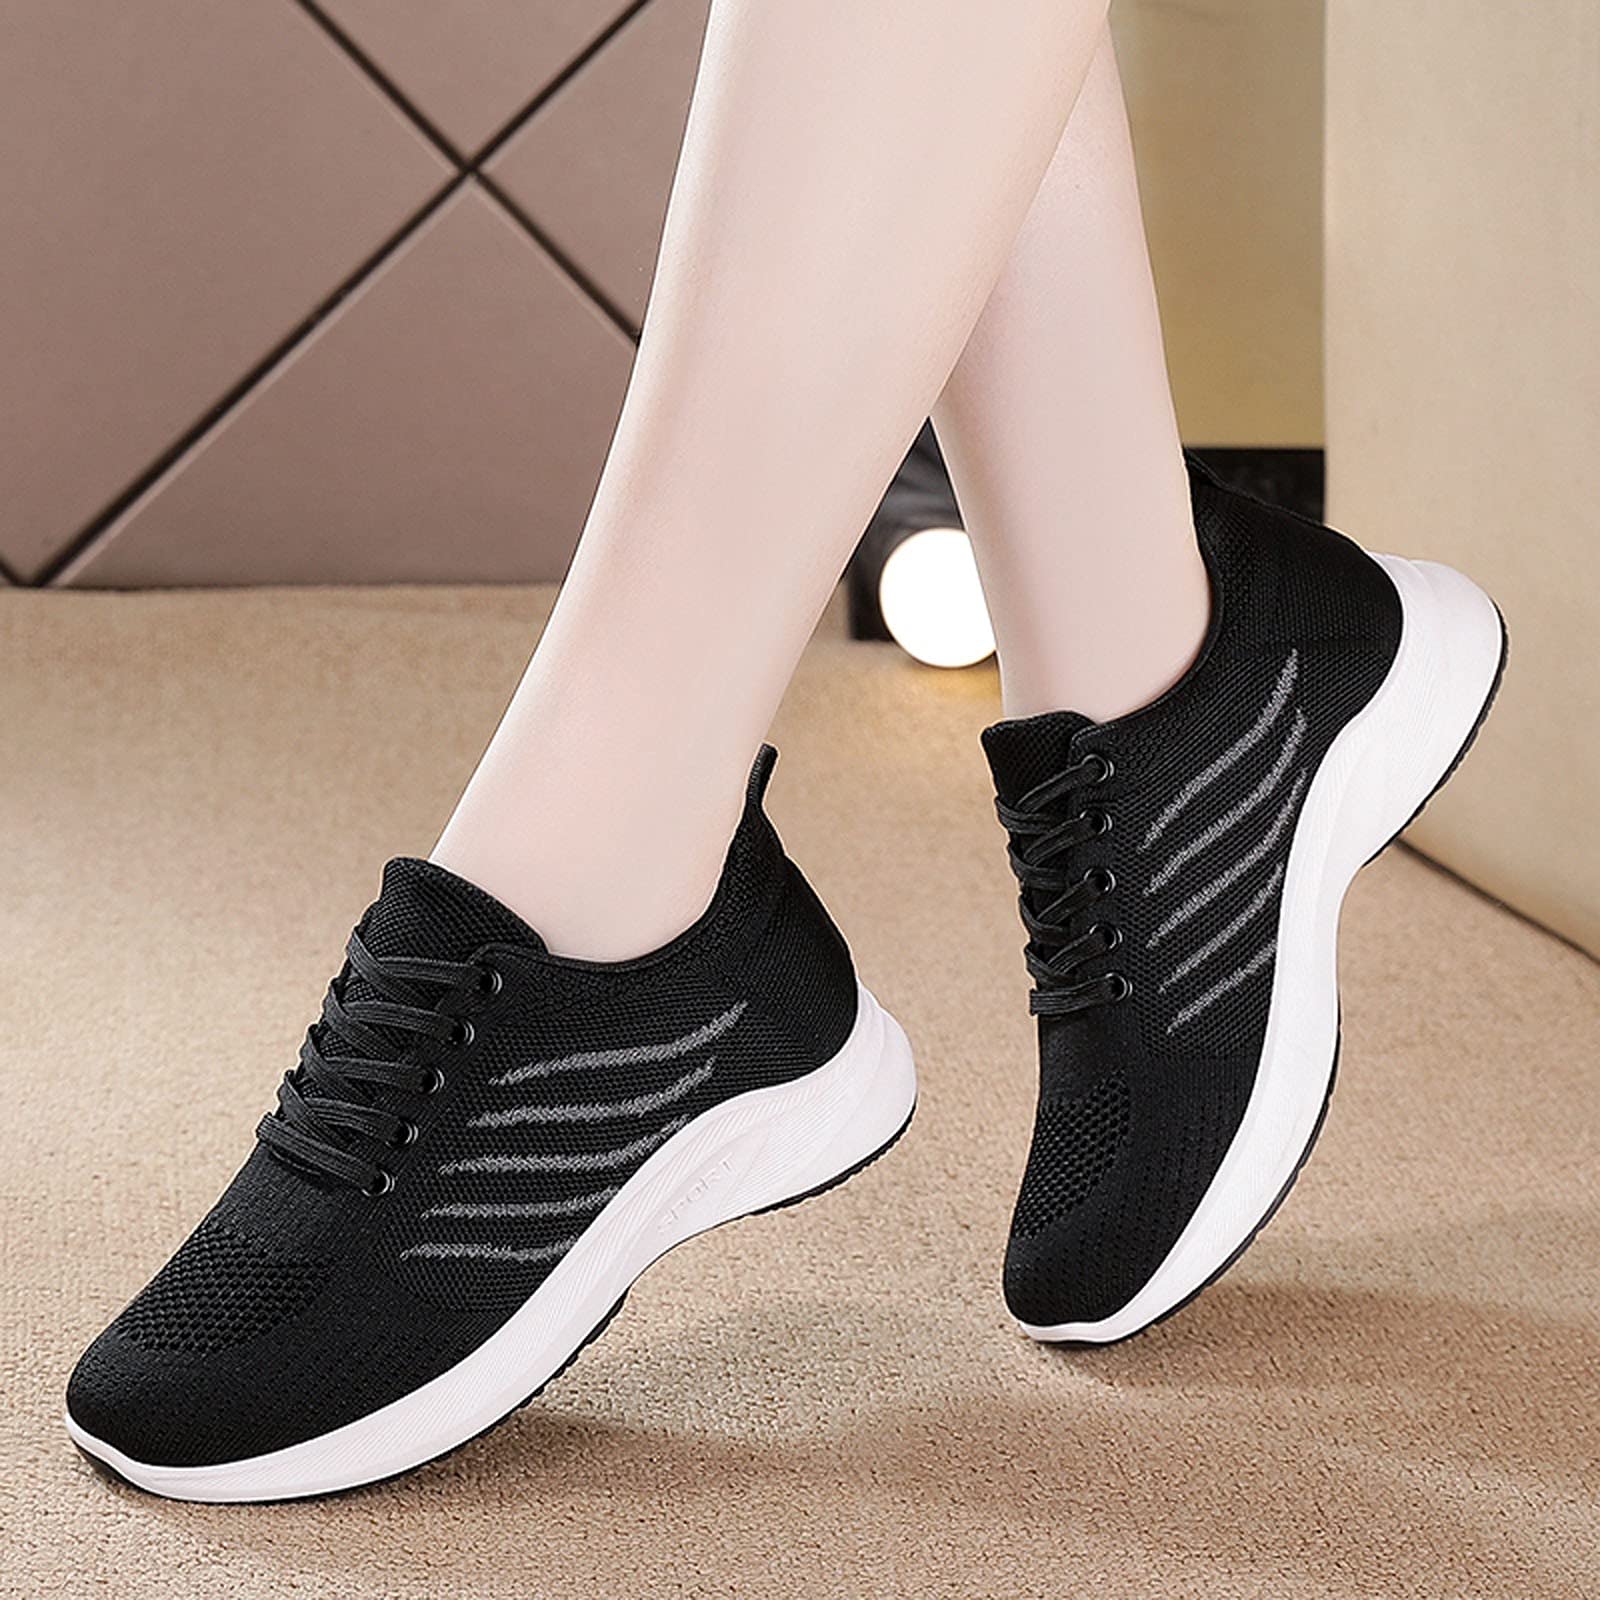 MLAGJSS Slip on Sneakers Womens Canvas Shoes Casual Cute Sneakers Low Cut Lace up Fashion Comfortable for Walking(0707ta321 Black,Size 8)